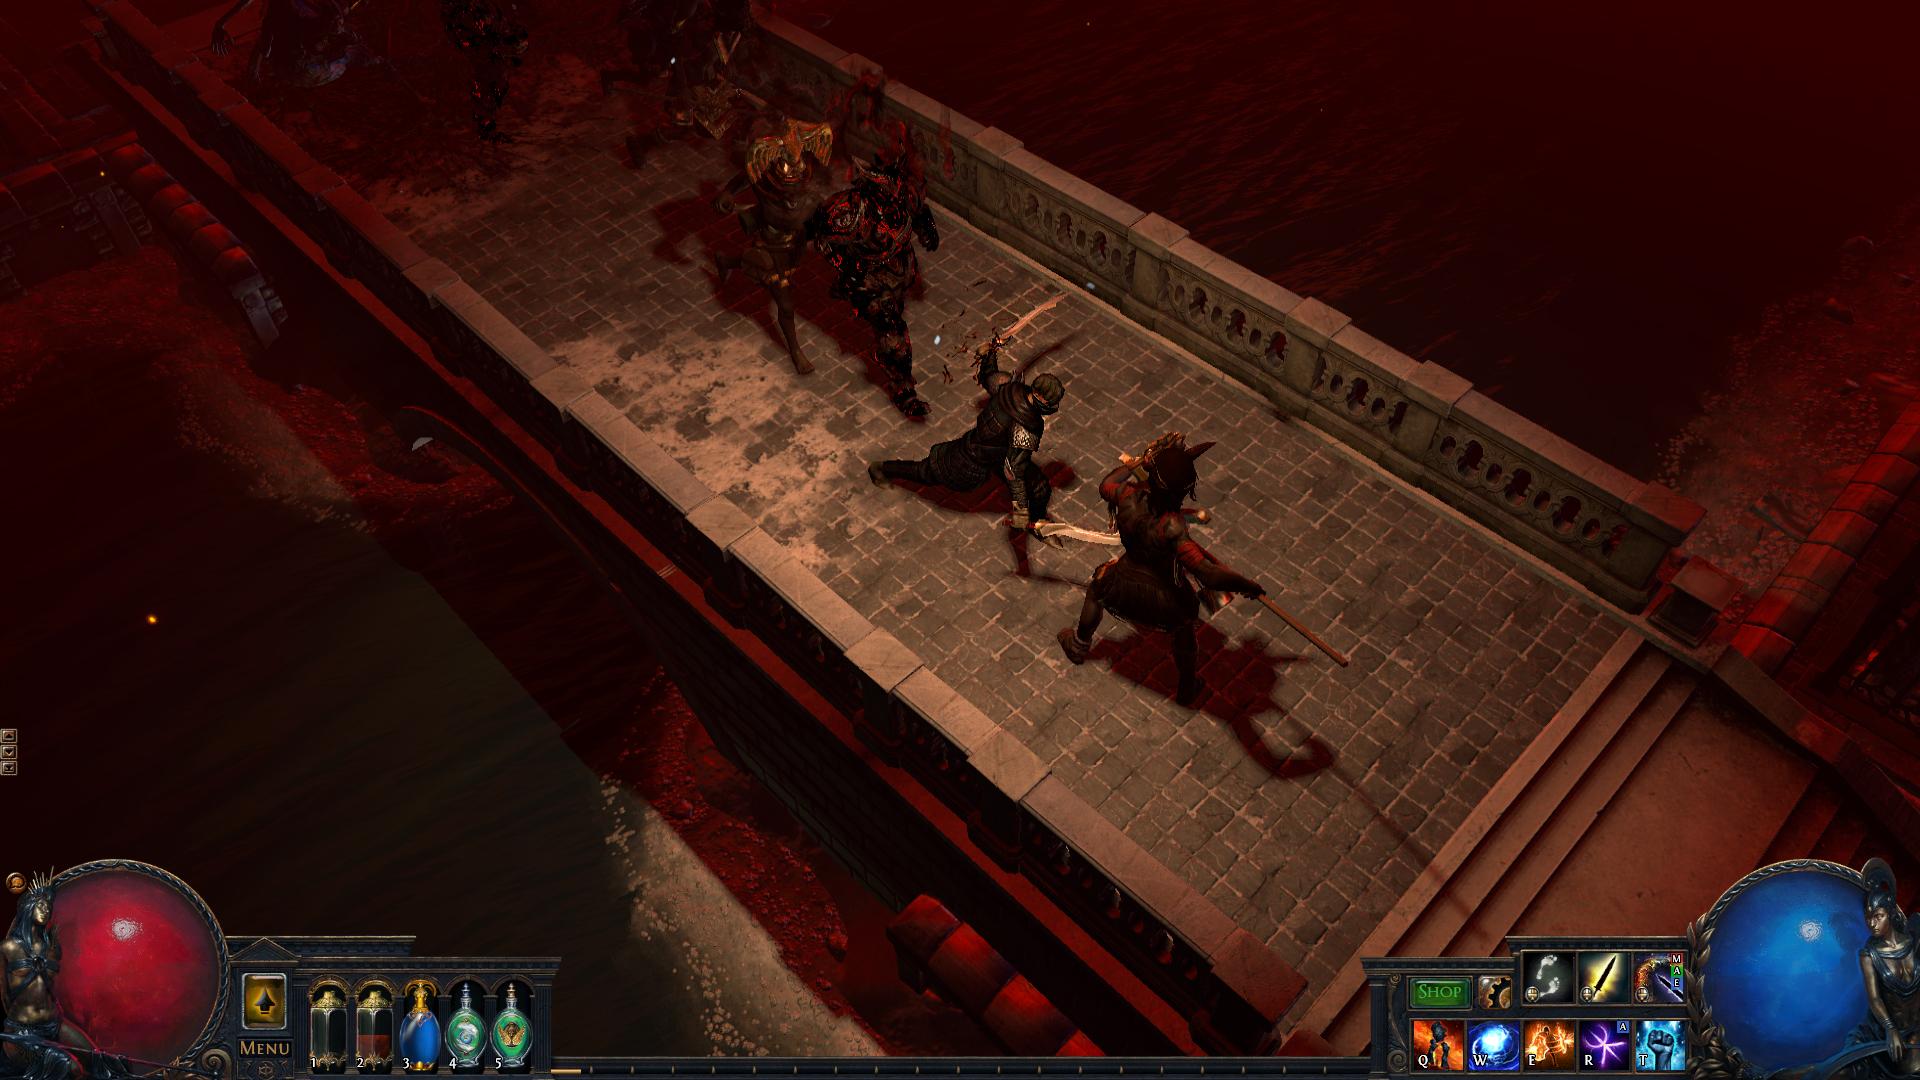 Screenshot №50 from game Path of Exile